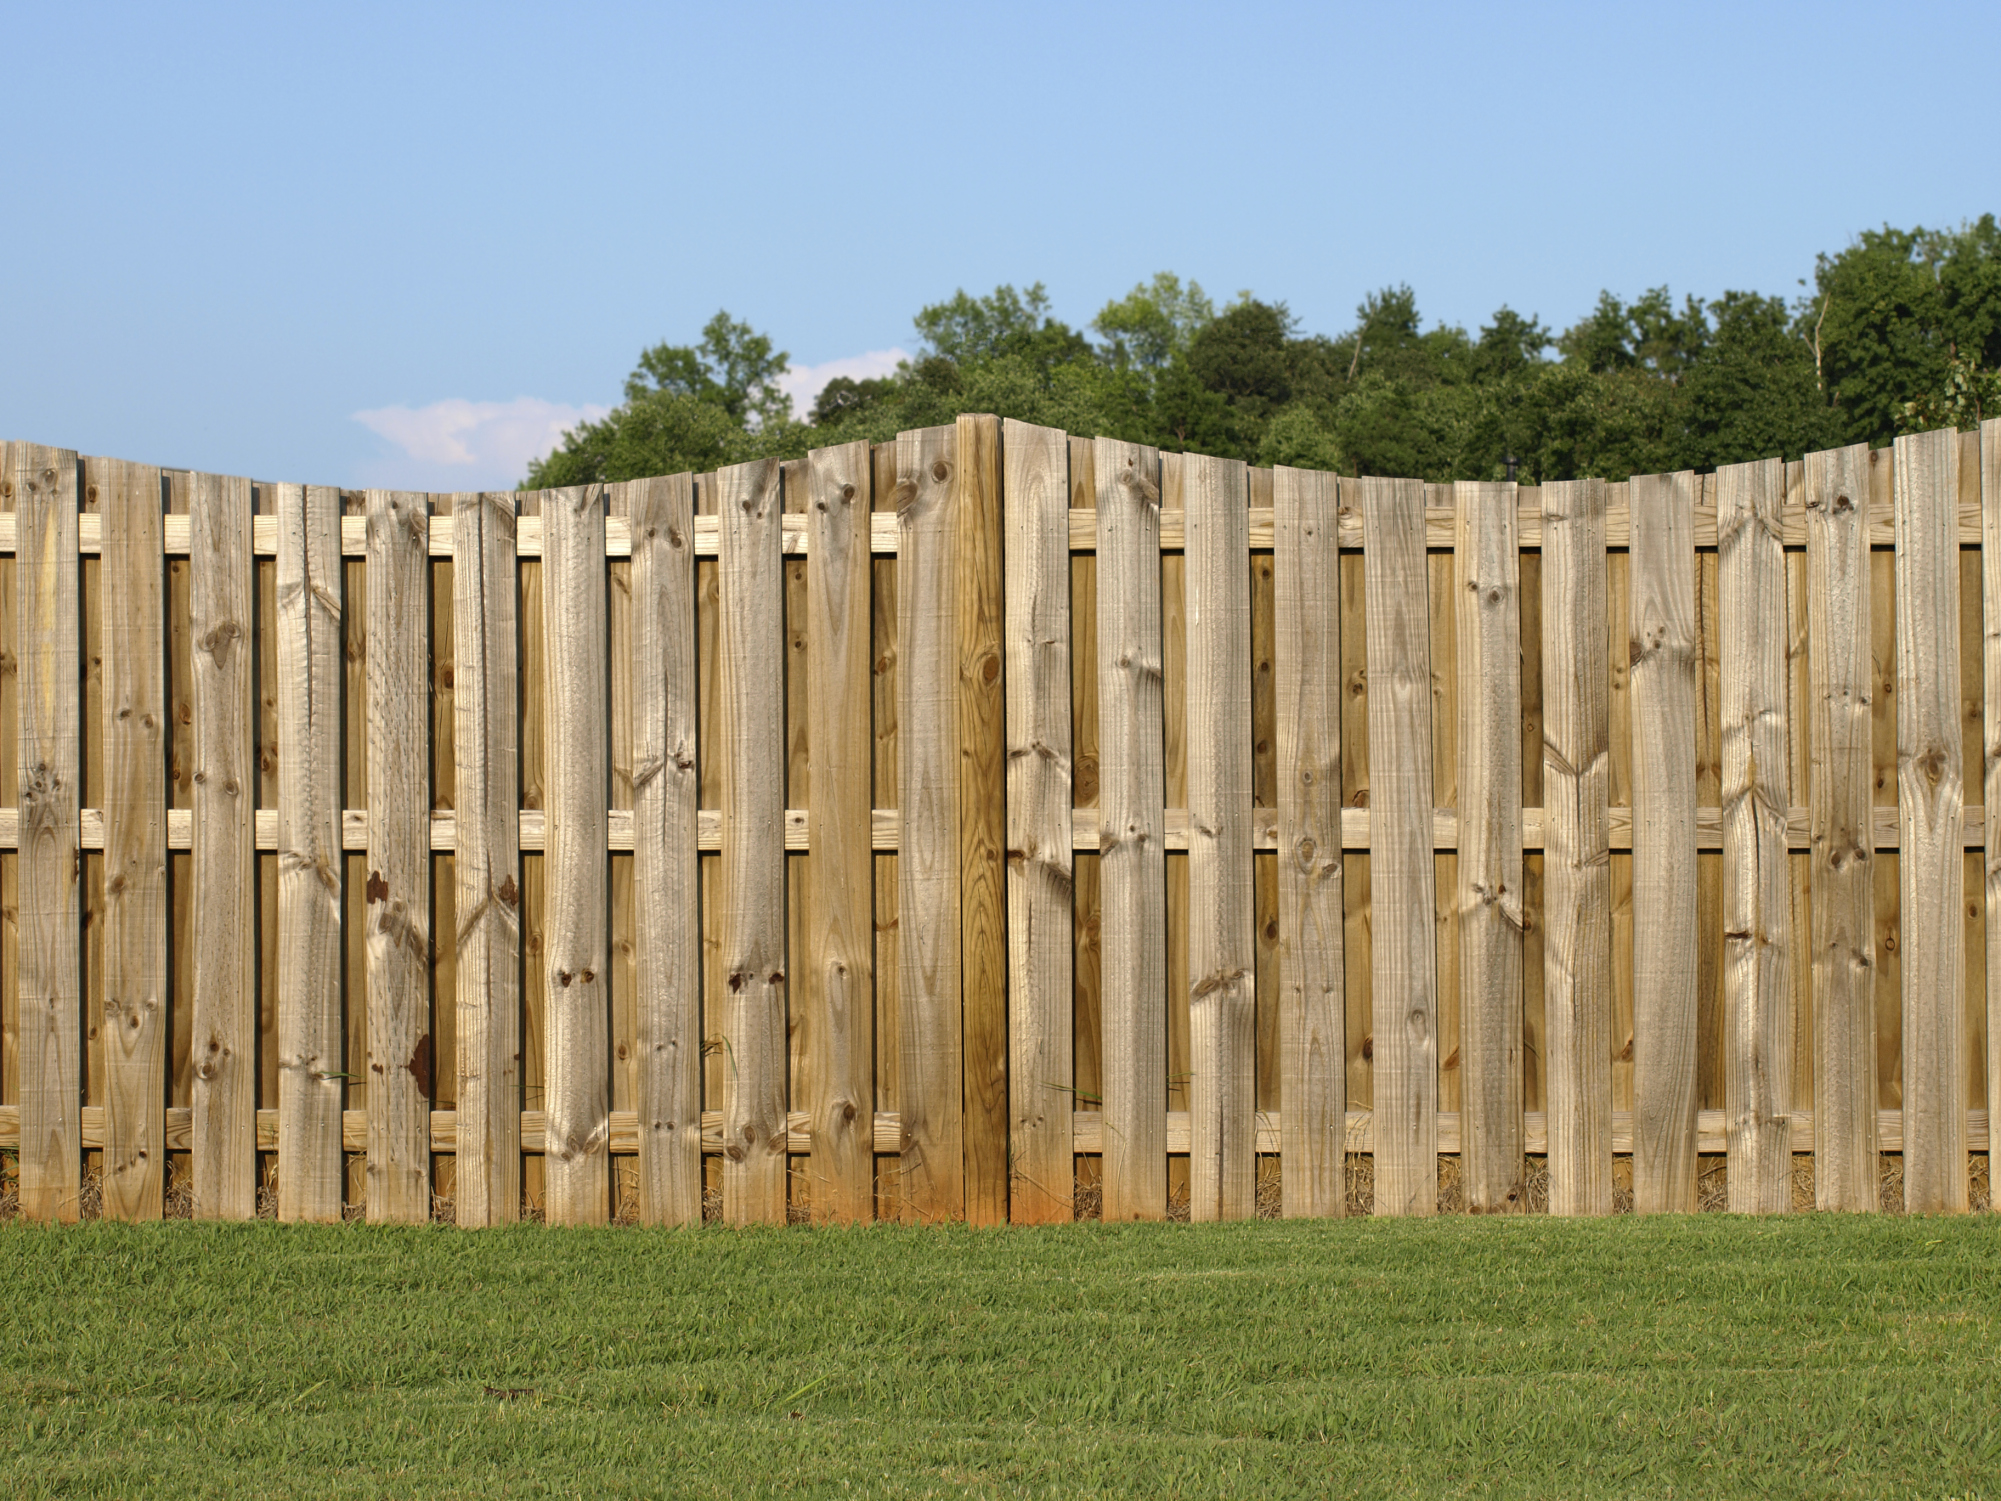 Wood Fence vs Chain Link Fence - Hercules Fence Hercules Fence